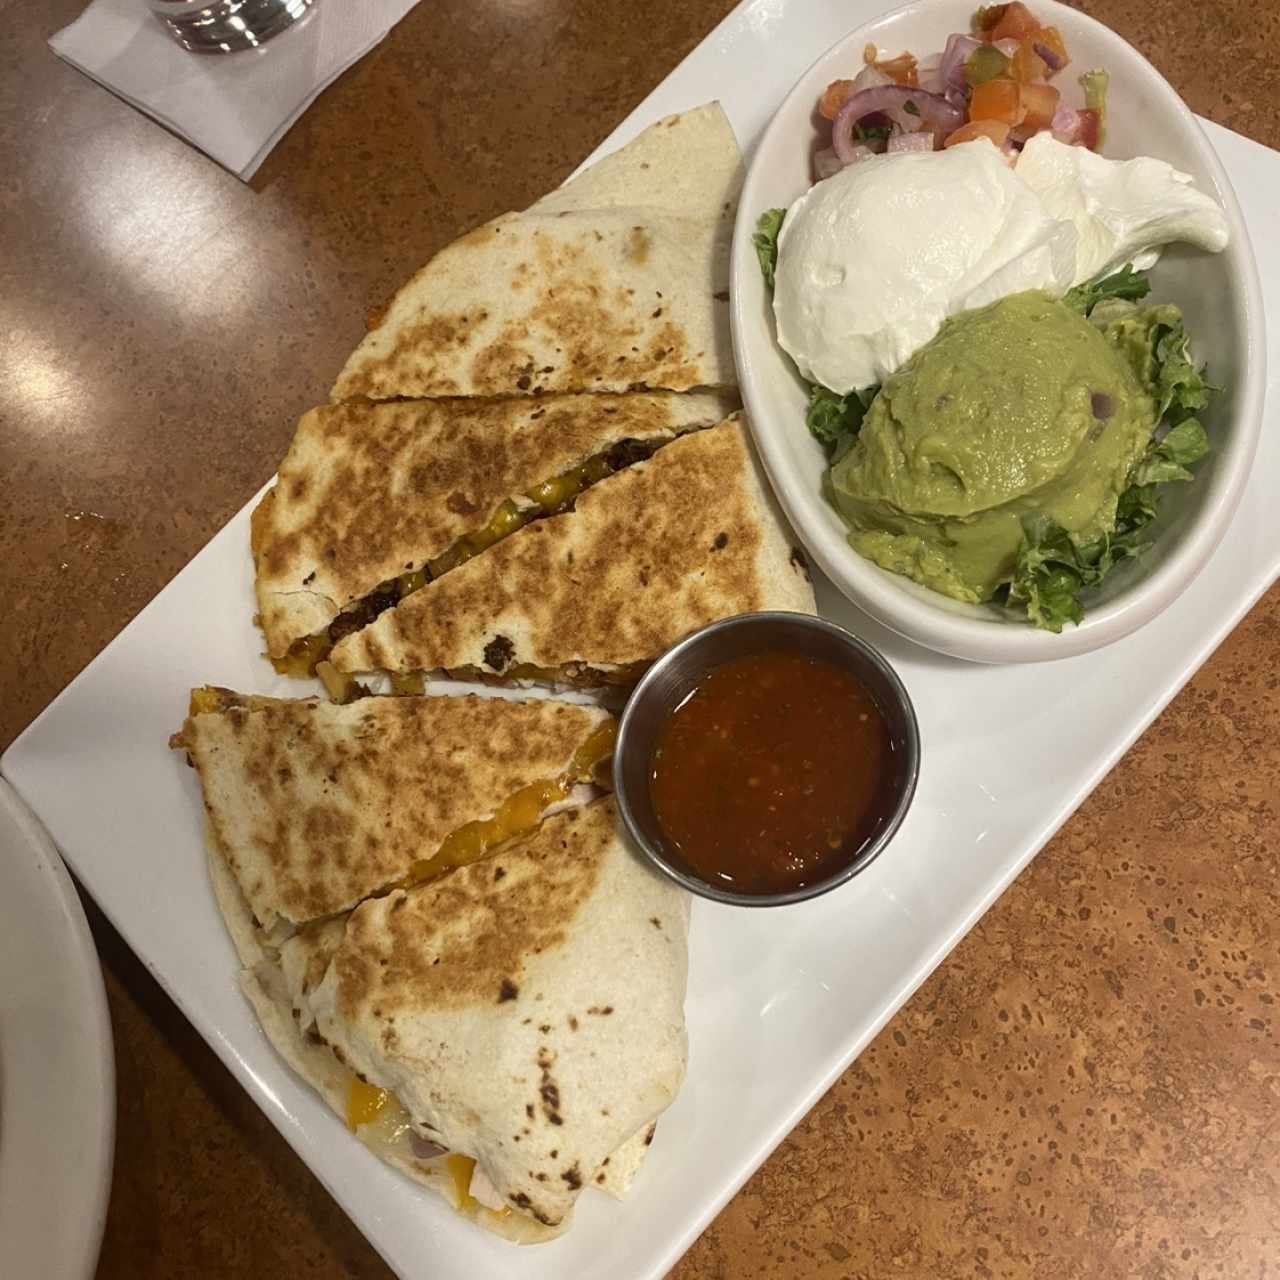 Appetizers - GRILLED CHICKEN QUESADILLAS